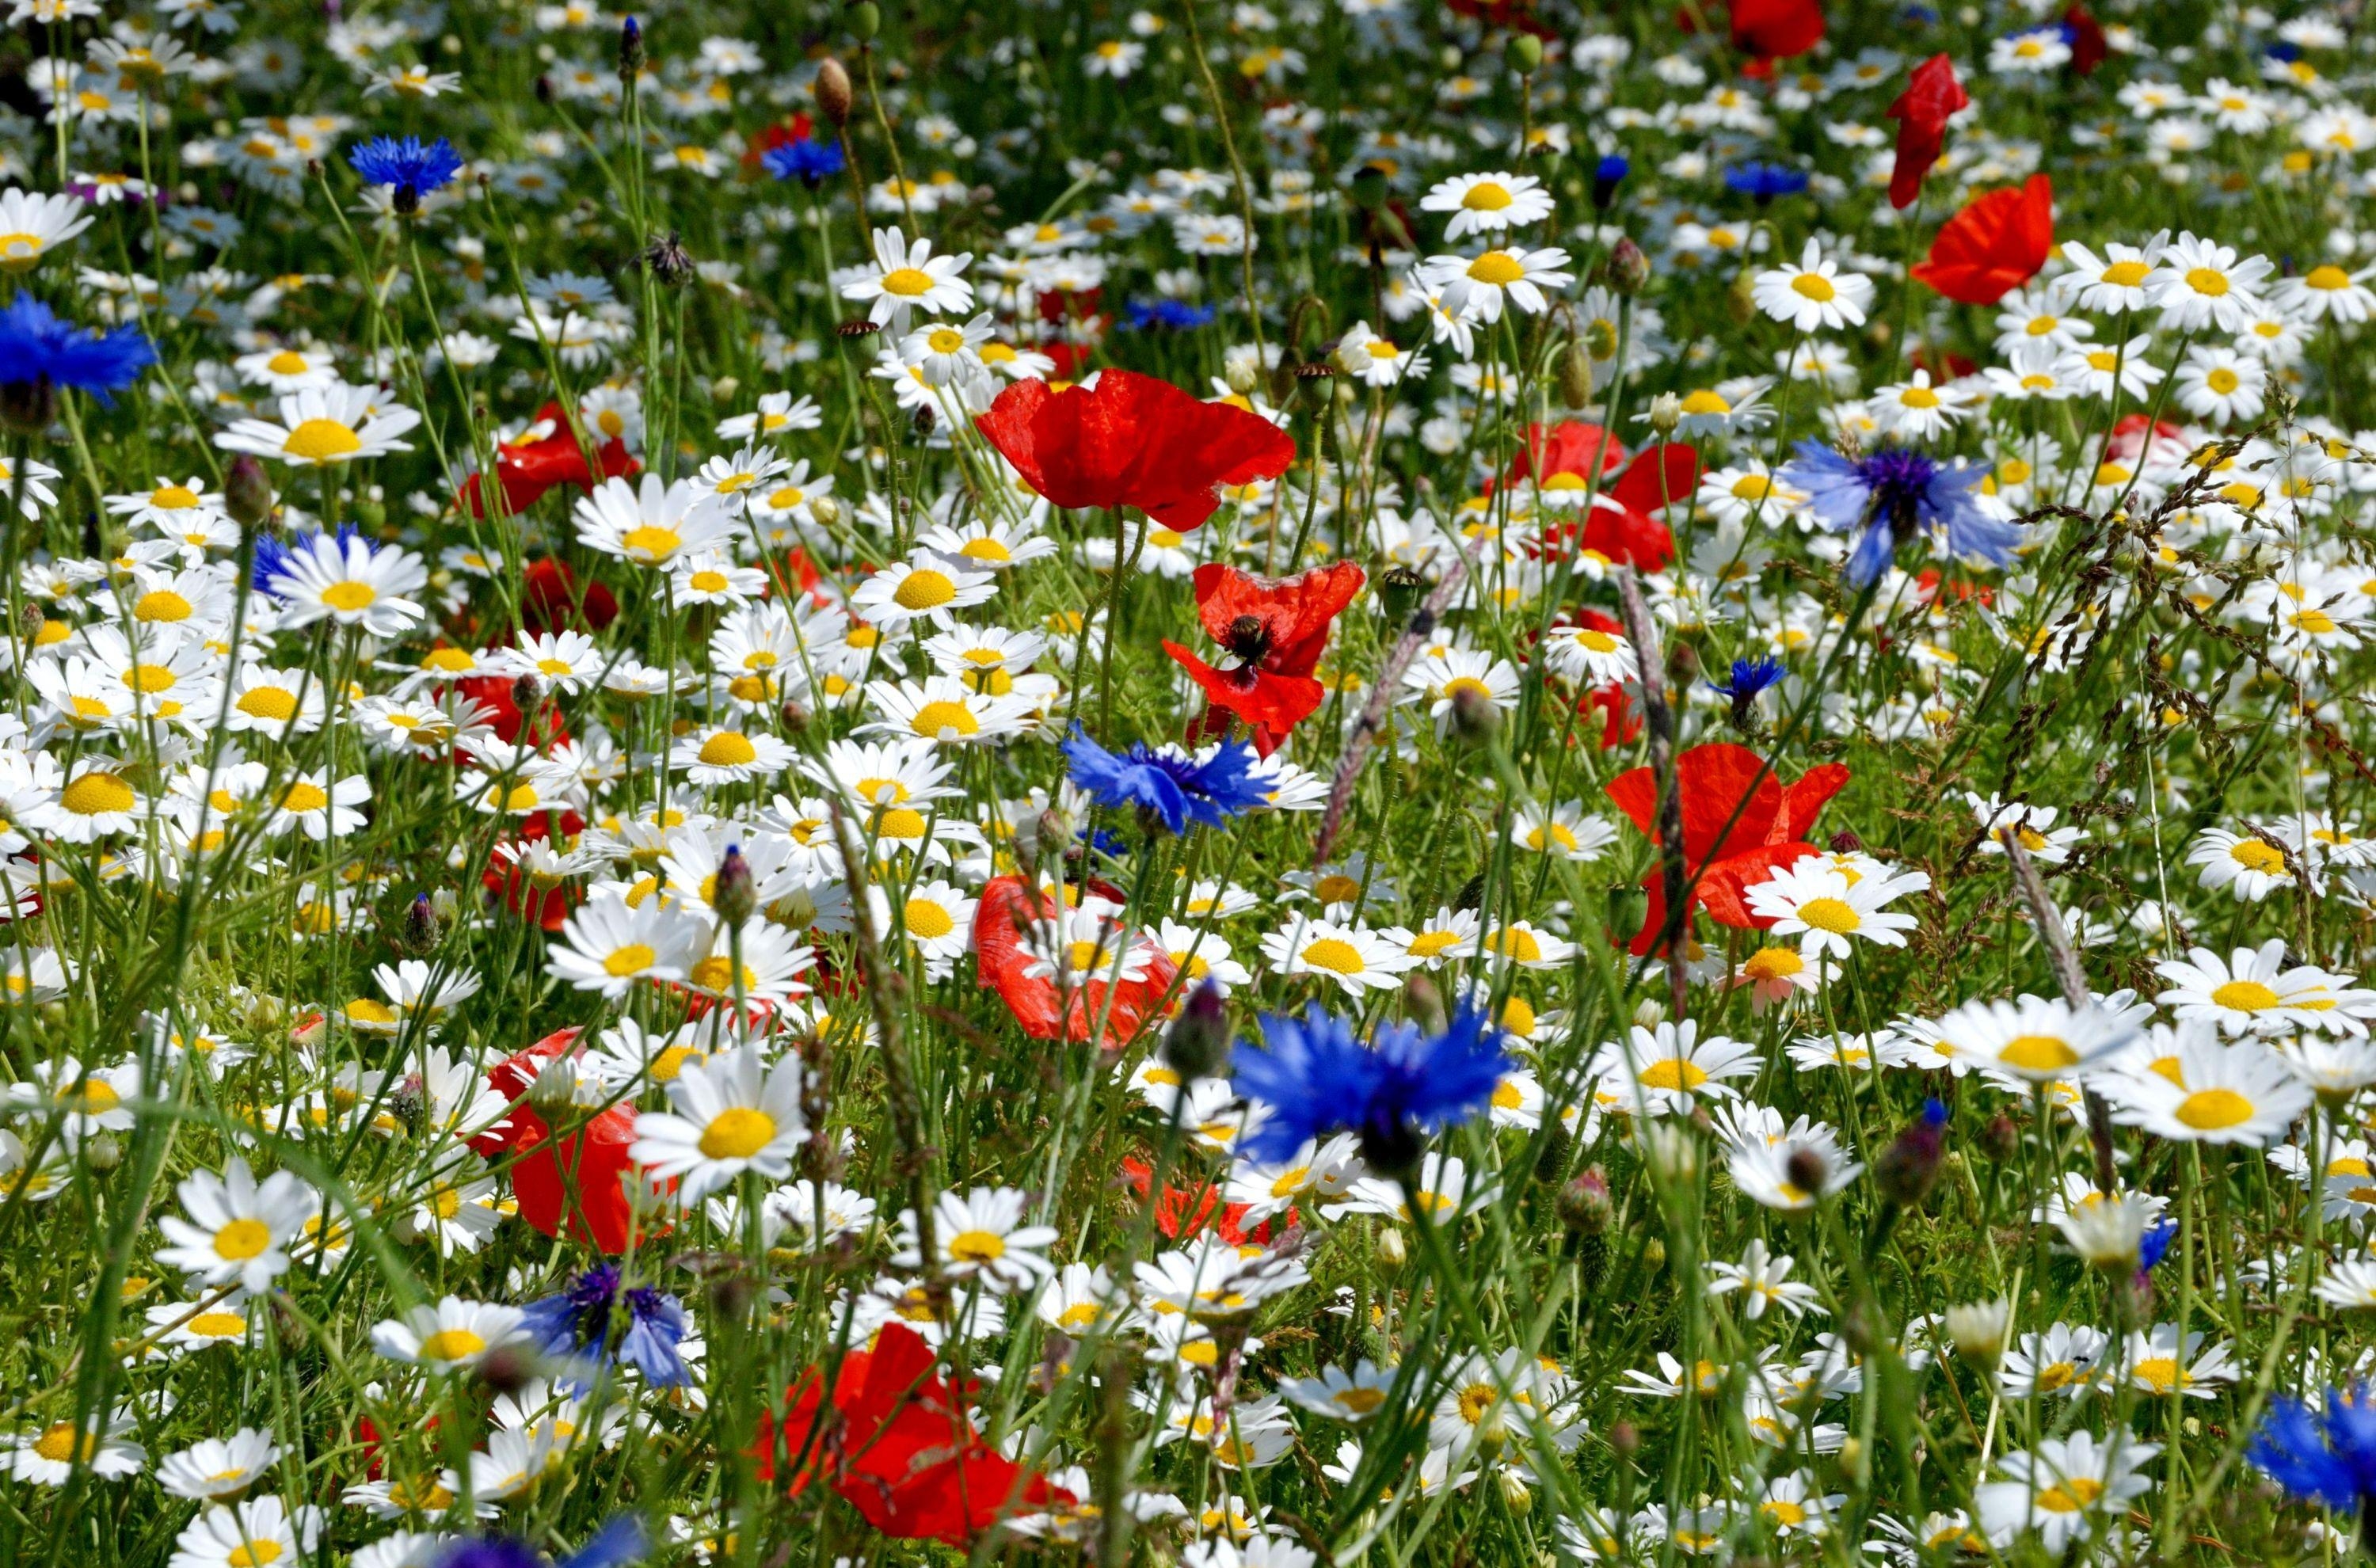 summer, glade, poppies, blue cornflowers, flowers, camomile, ears, polyana, spikes